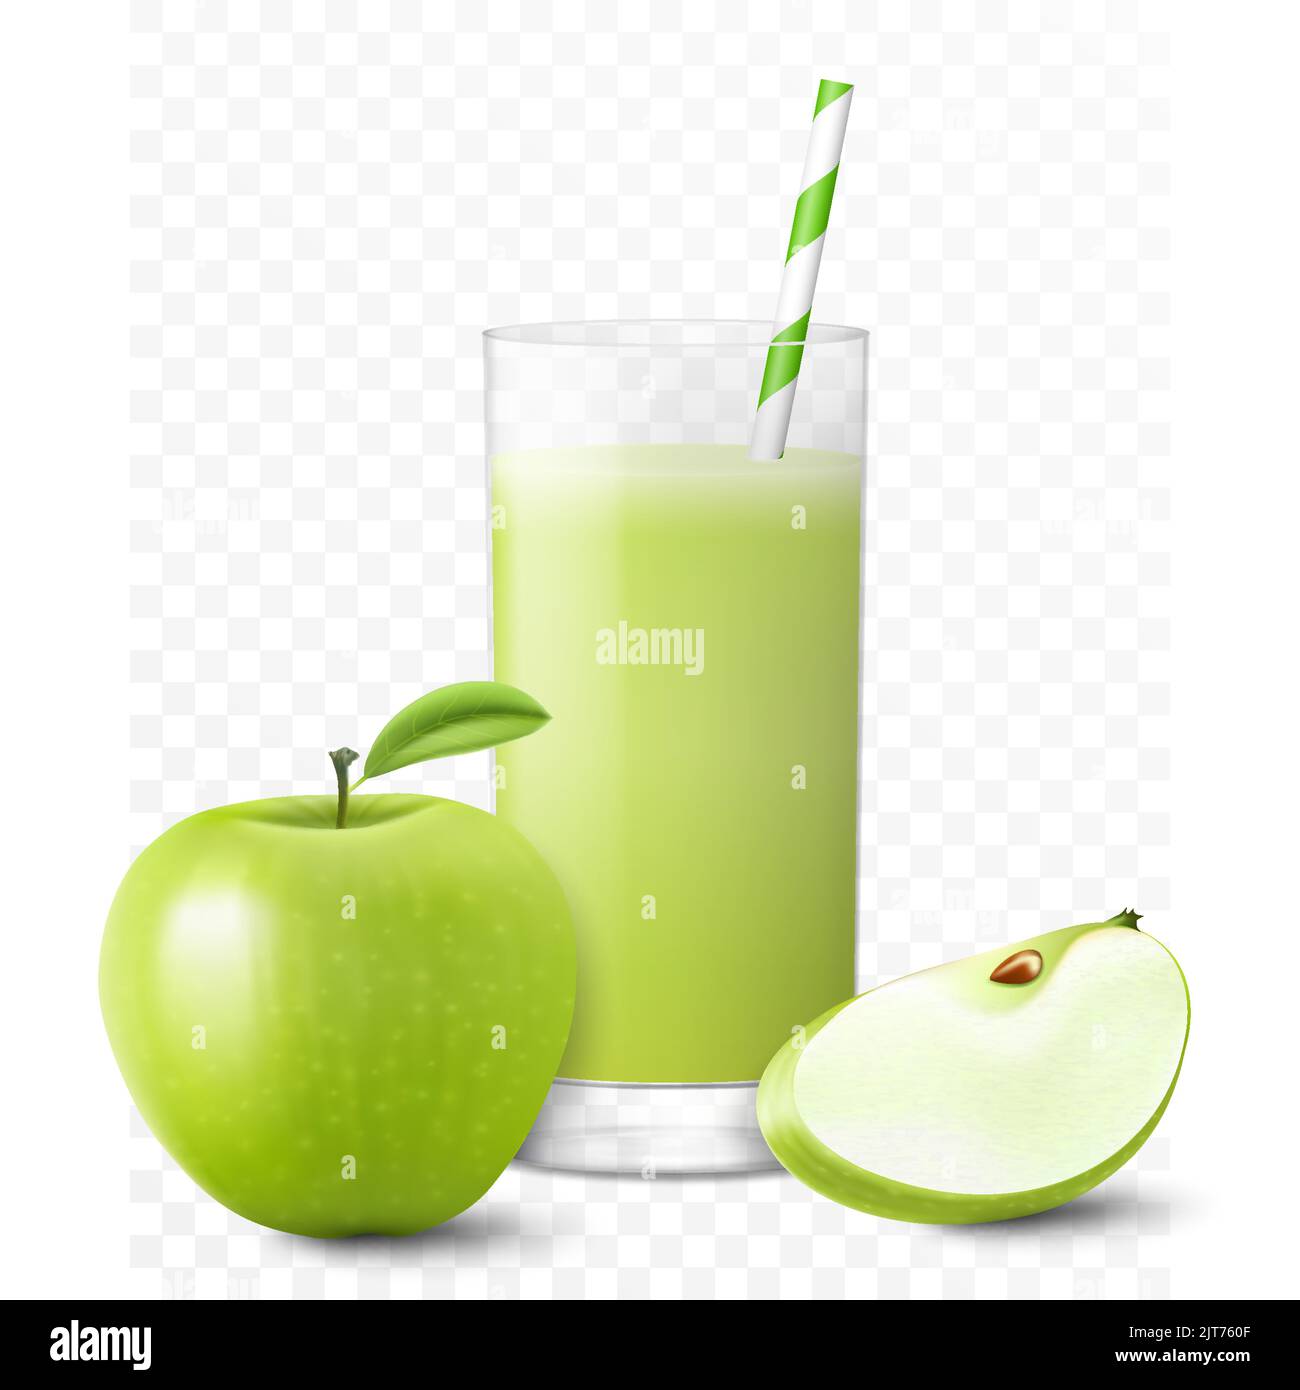 https://c8.alamy.com/comp/2JT760F/apple-juice-or-smoothie-in-glass-with-straw-apple-fresh-isolated-on-transparent-background-green-apple-whole-and-slice-realistic-3d-vector-illustr-2JT760F.jpg